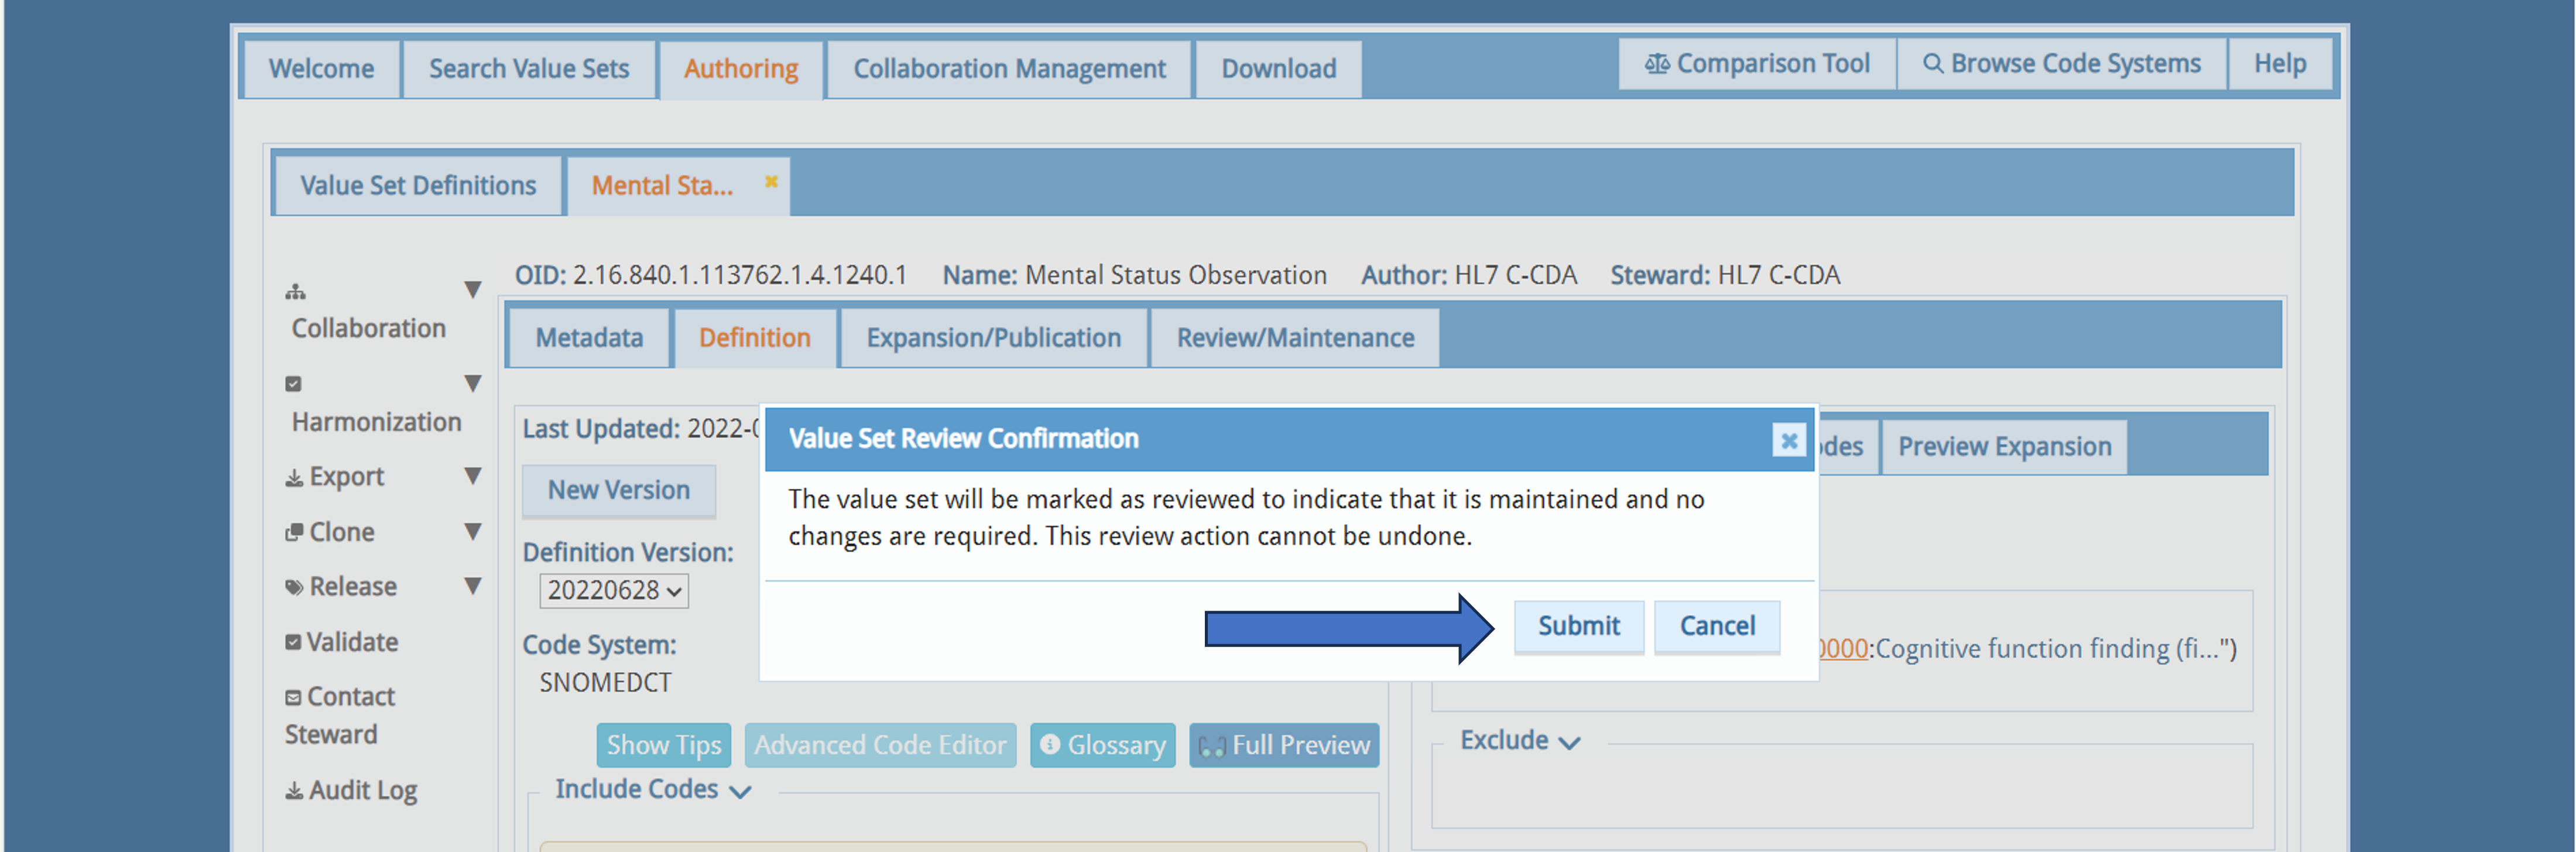 Value Set Review Confirmationi window in VSAC Authoring